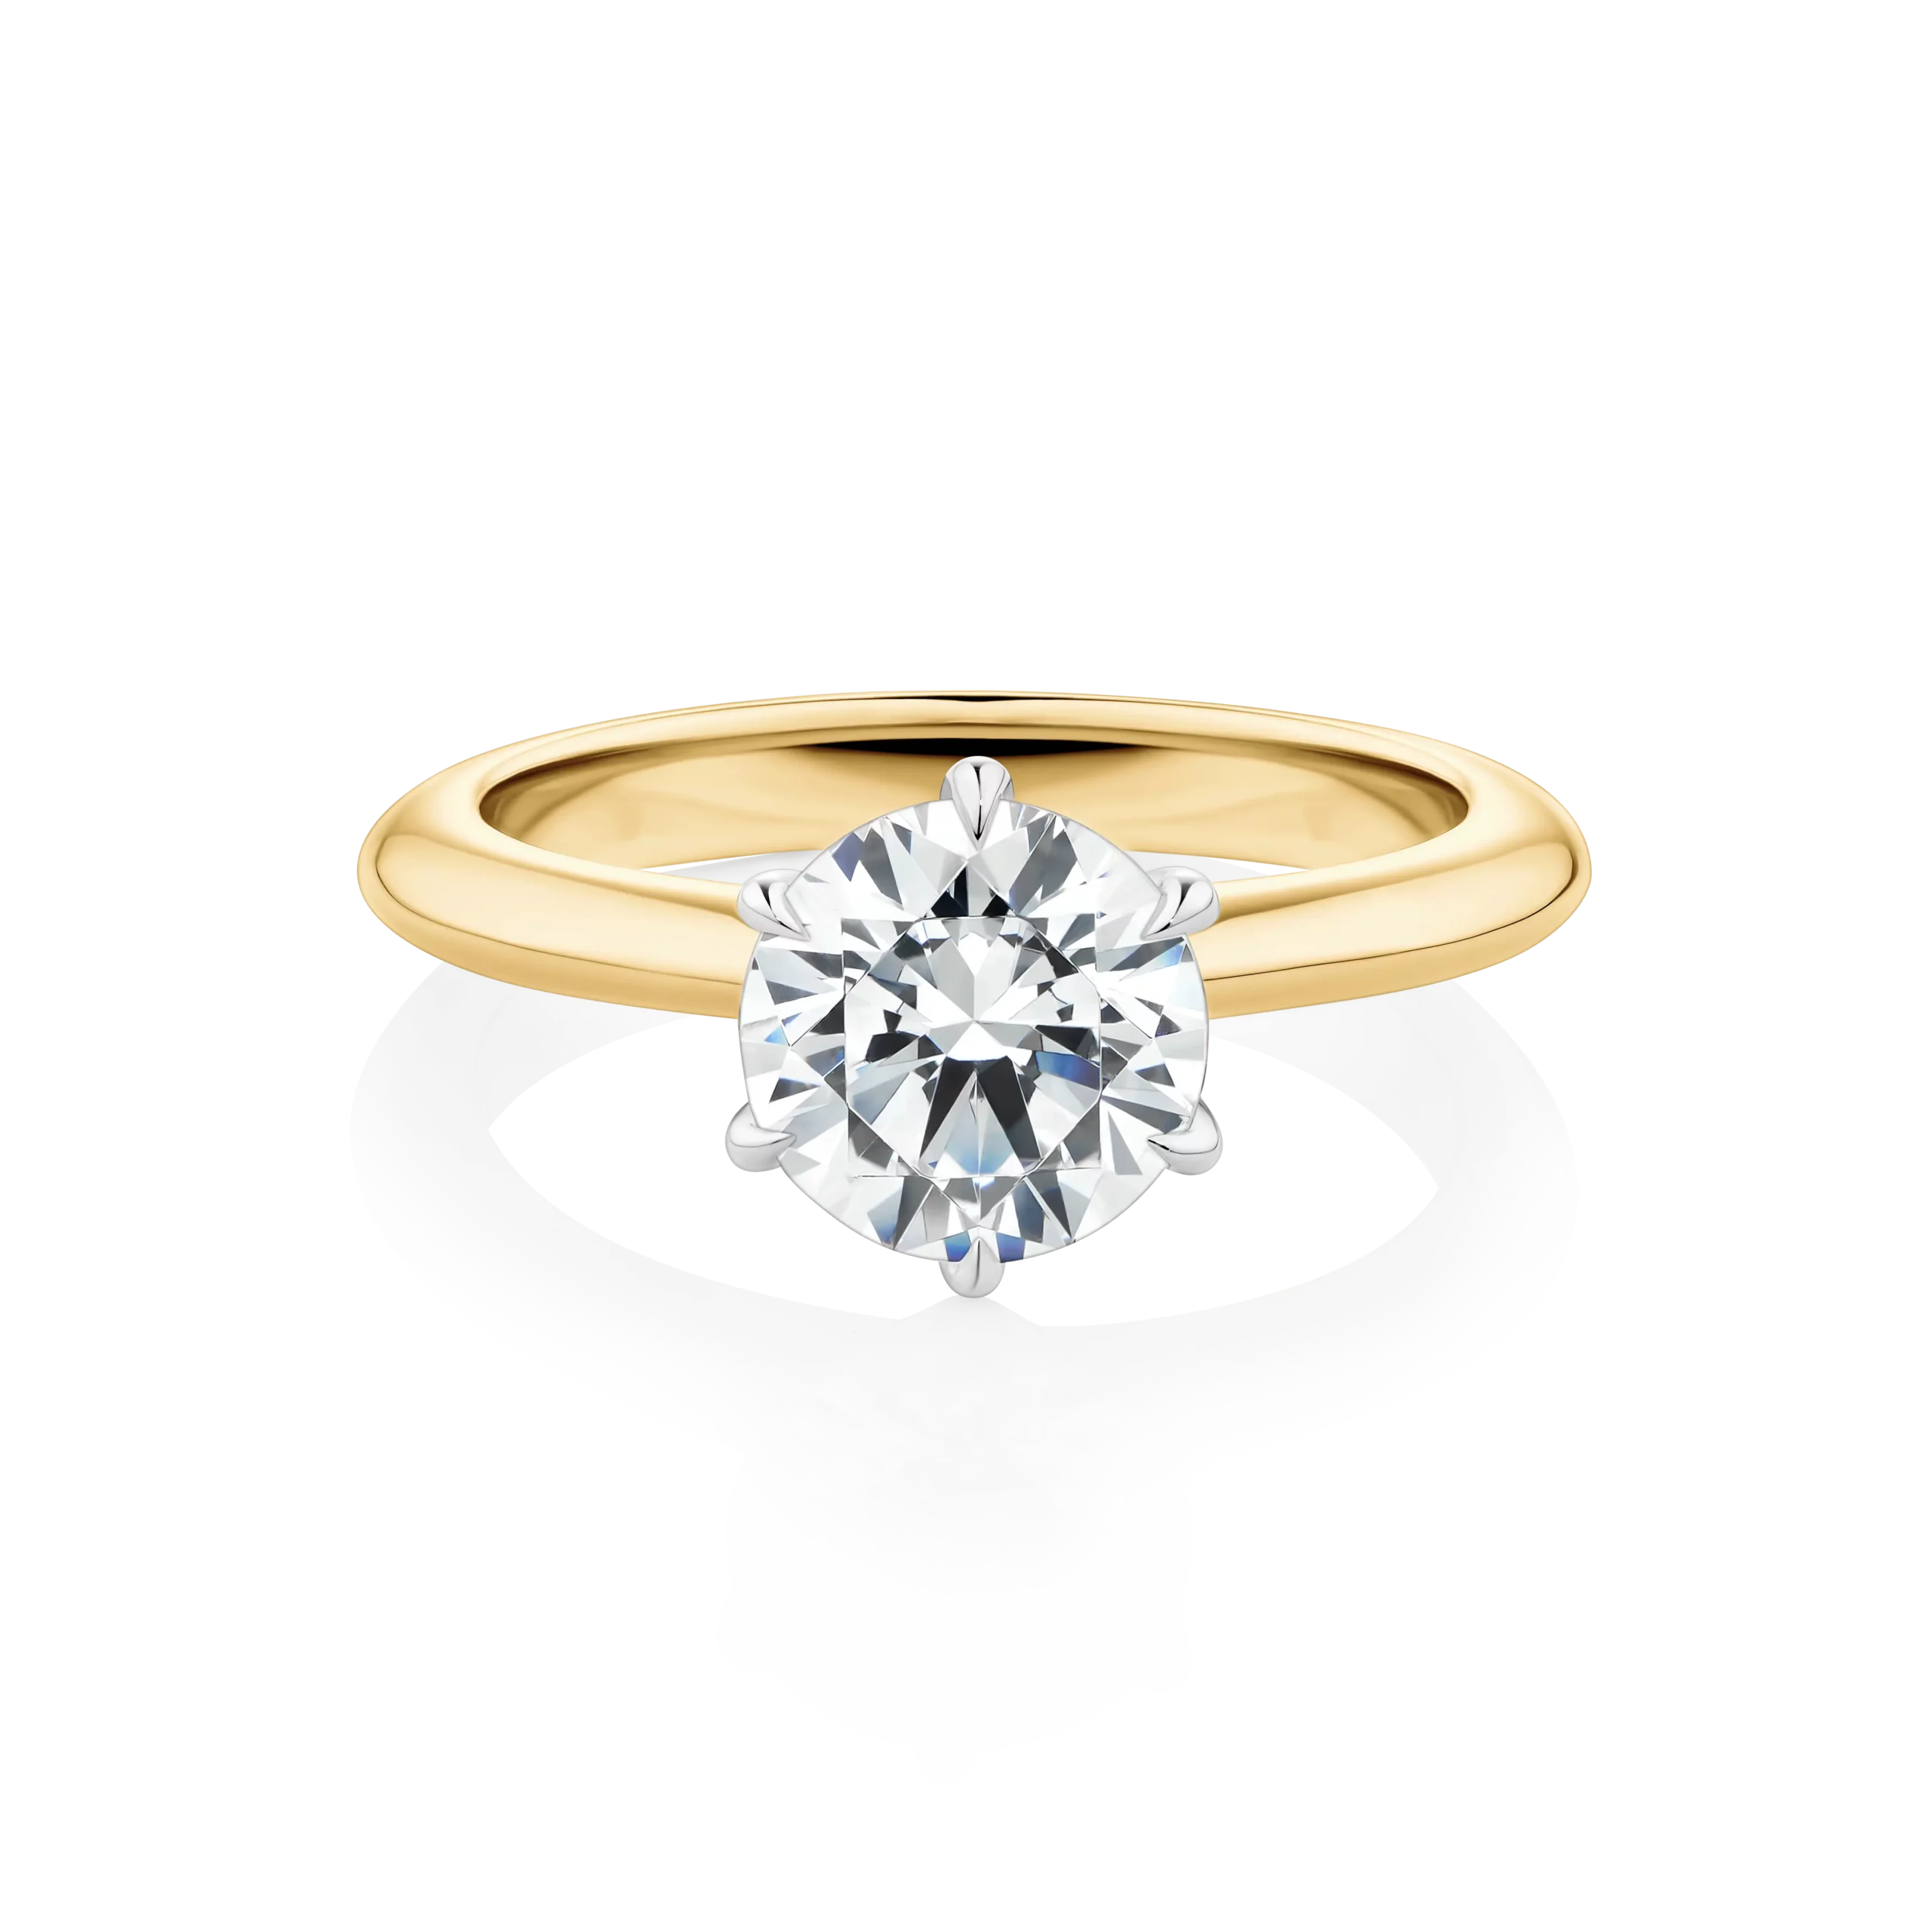 Southern-Star-Yellow-Gold-Two-Tone-6-claw-Round-Cut-Diamond-Engagement-Ring